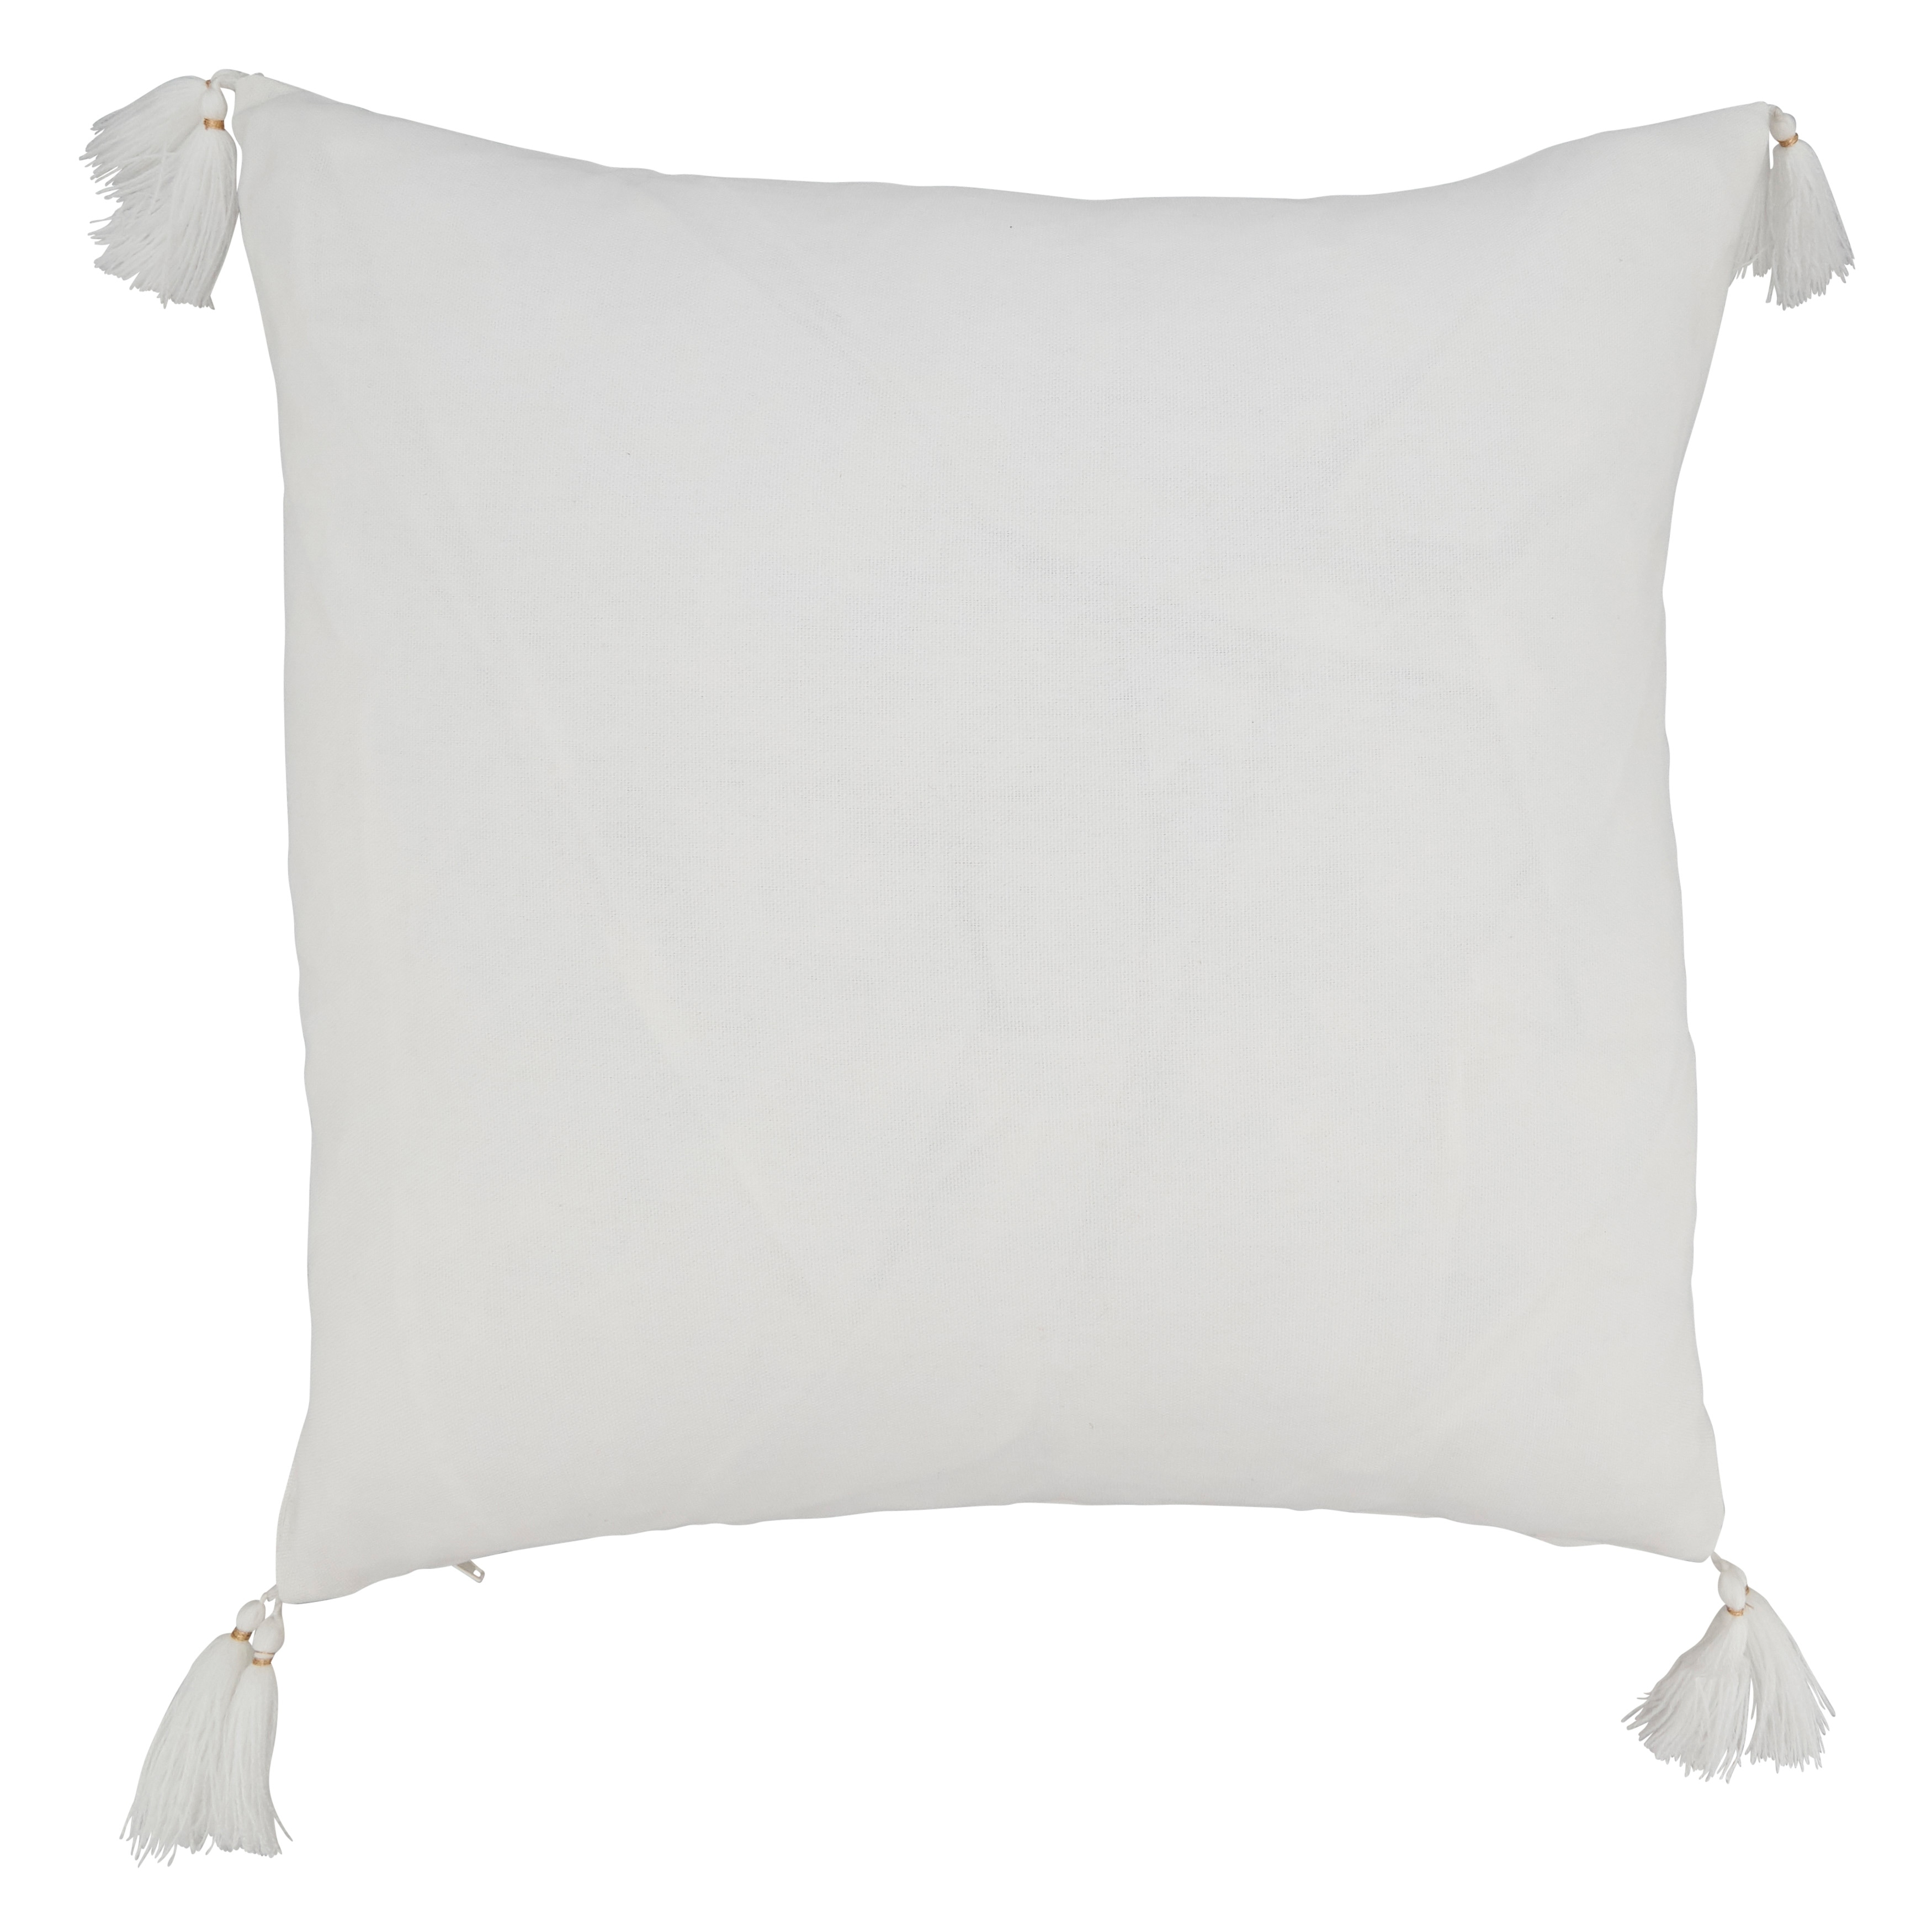 https://ak1.ostkcdn.com/images/products/is/images/direct/03d74826a67f9624e740602ca13a50b5f20f9e2f/Frosty-Flair-Snowflake-Throw-Pillow-with-Tassels.jpg